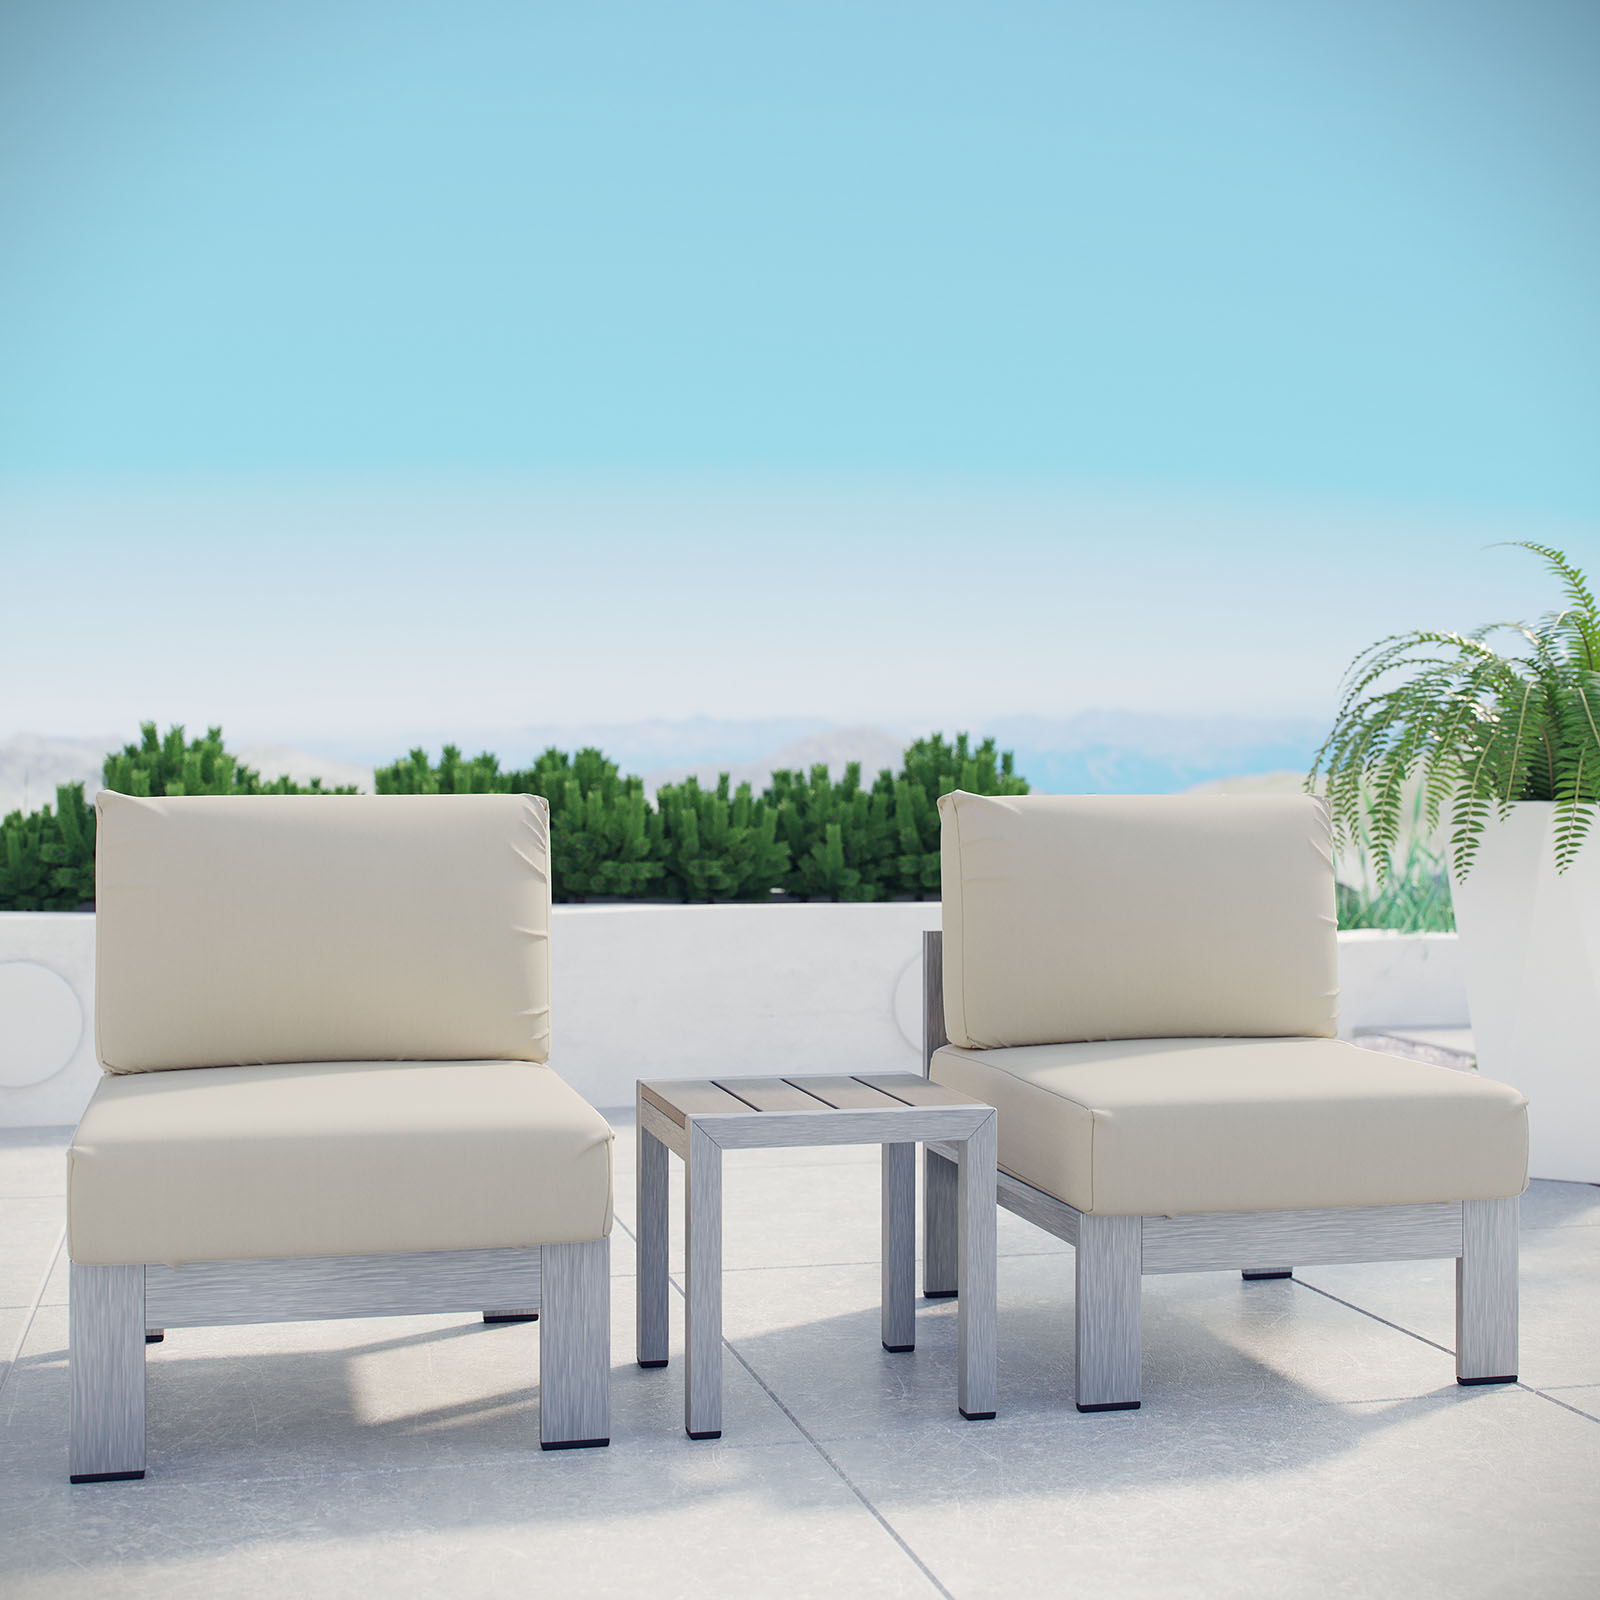 Modway Shore 3 Piece Outdoor Patio Aluminum Sectional Sofa Set in Silver Beige - image 1 of 6